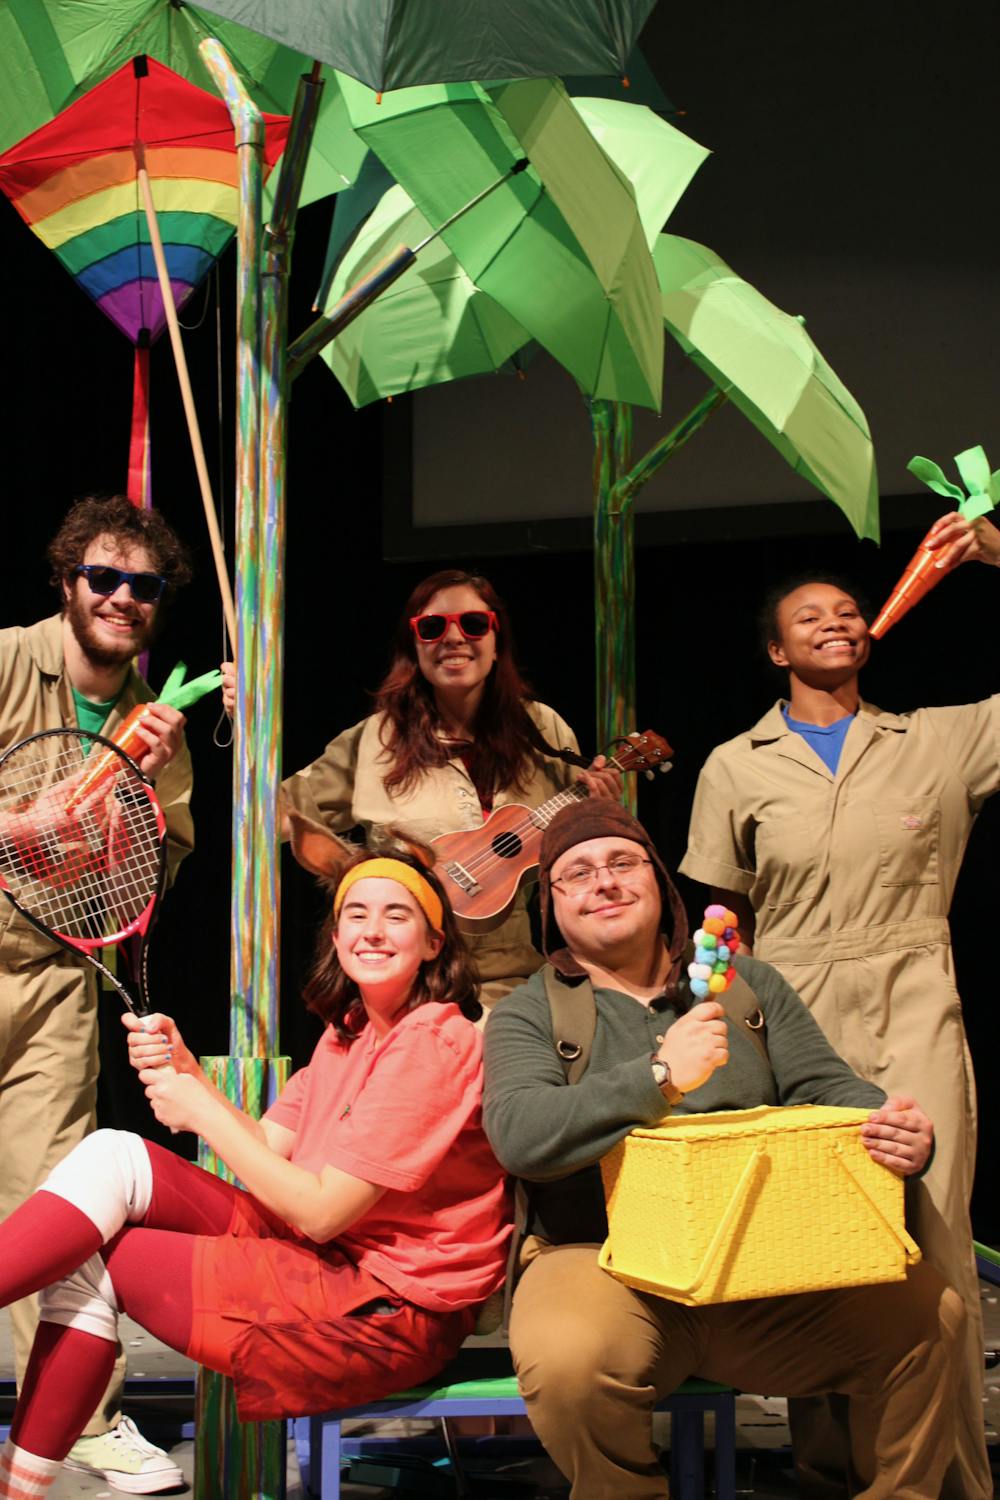 “Hare and Tortoise” brings the art of theater to children